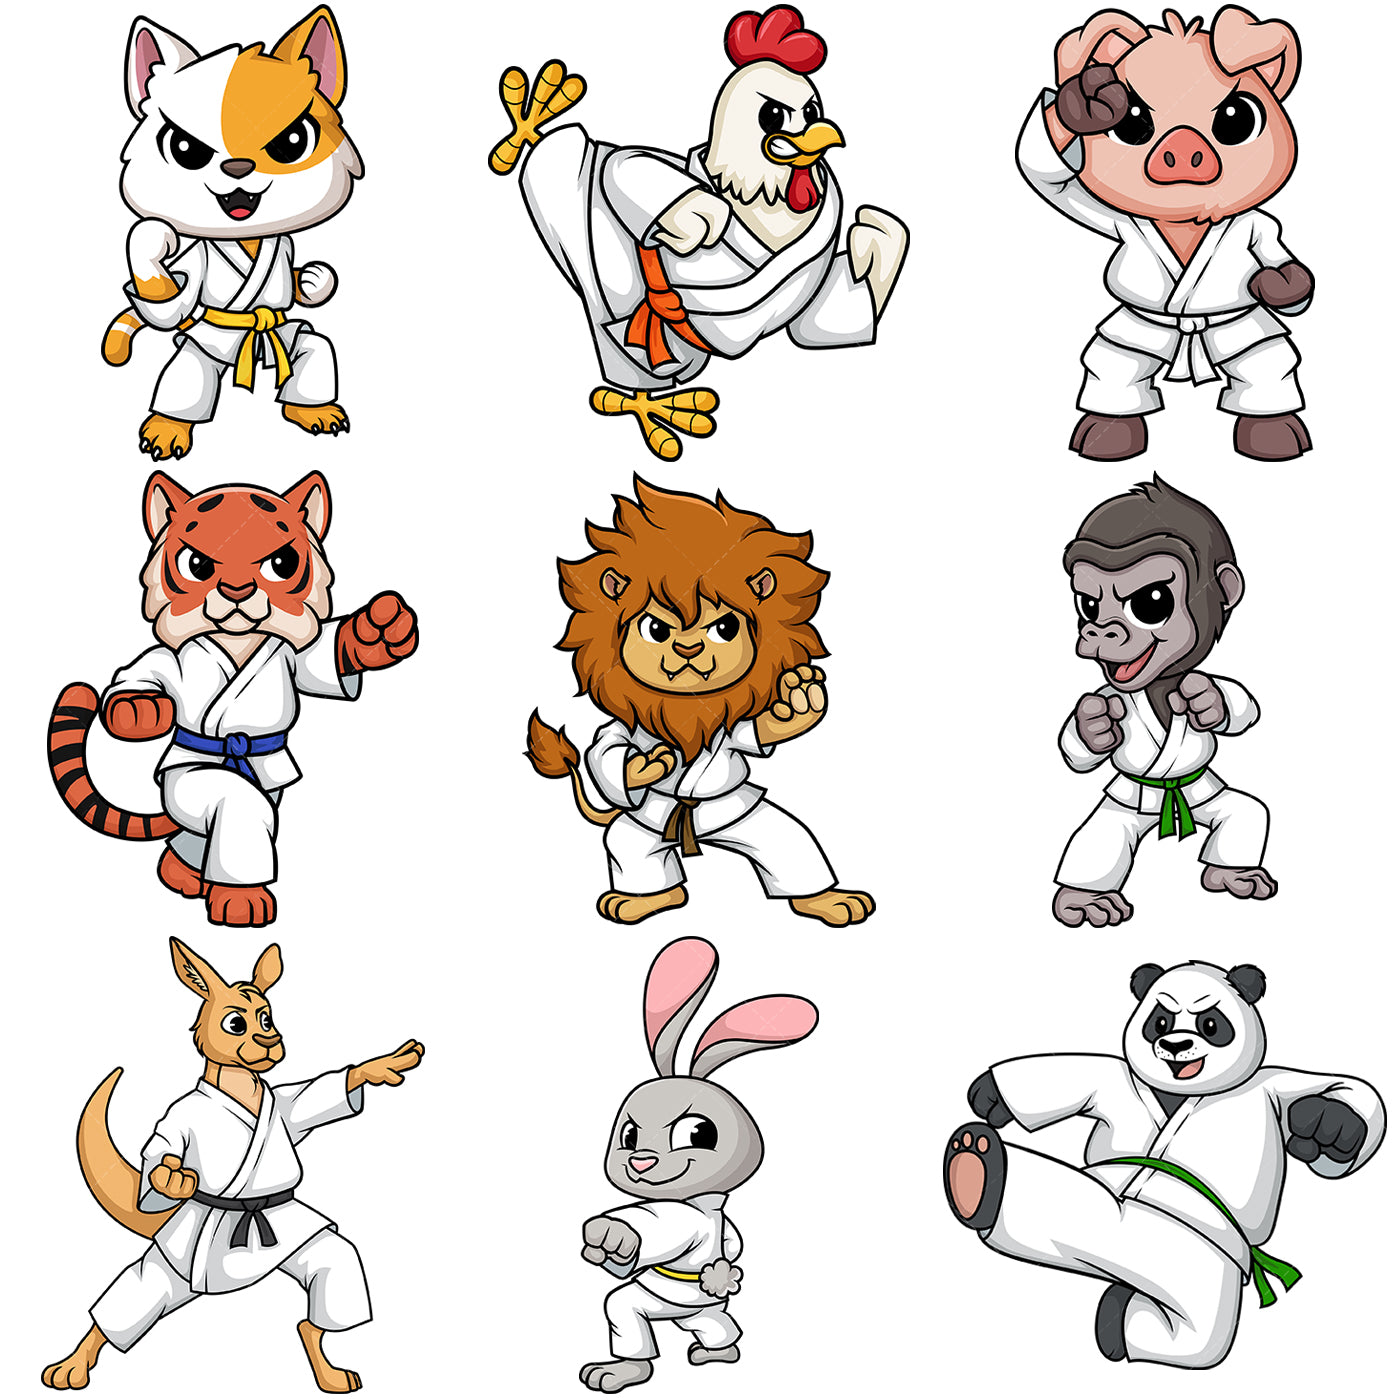 A bundle of 9 royalty-free stock vector illustrations of animals doing karate.